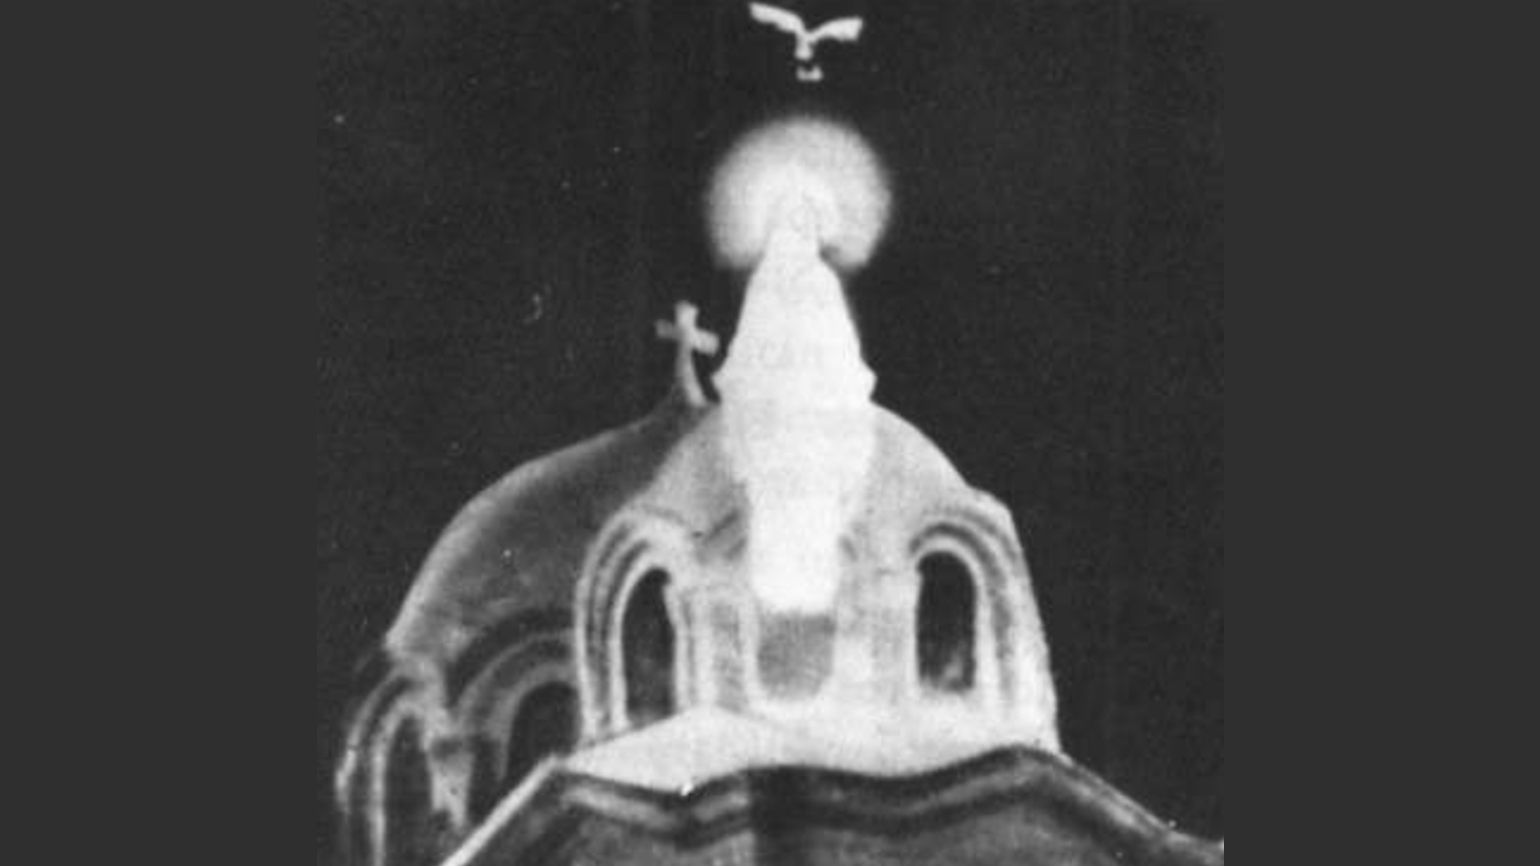 Photo of Mary apparition from magazine story